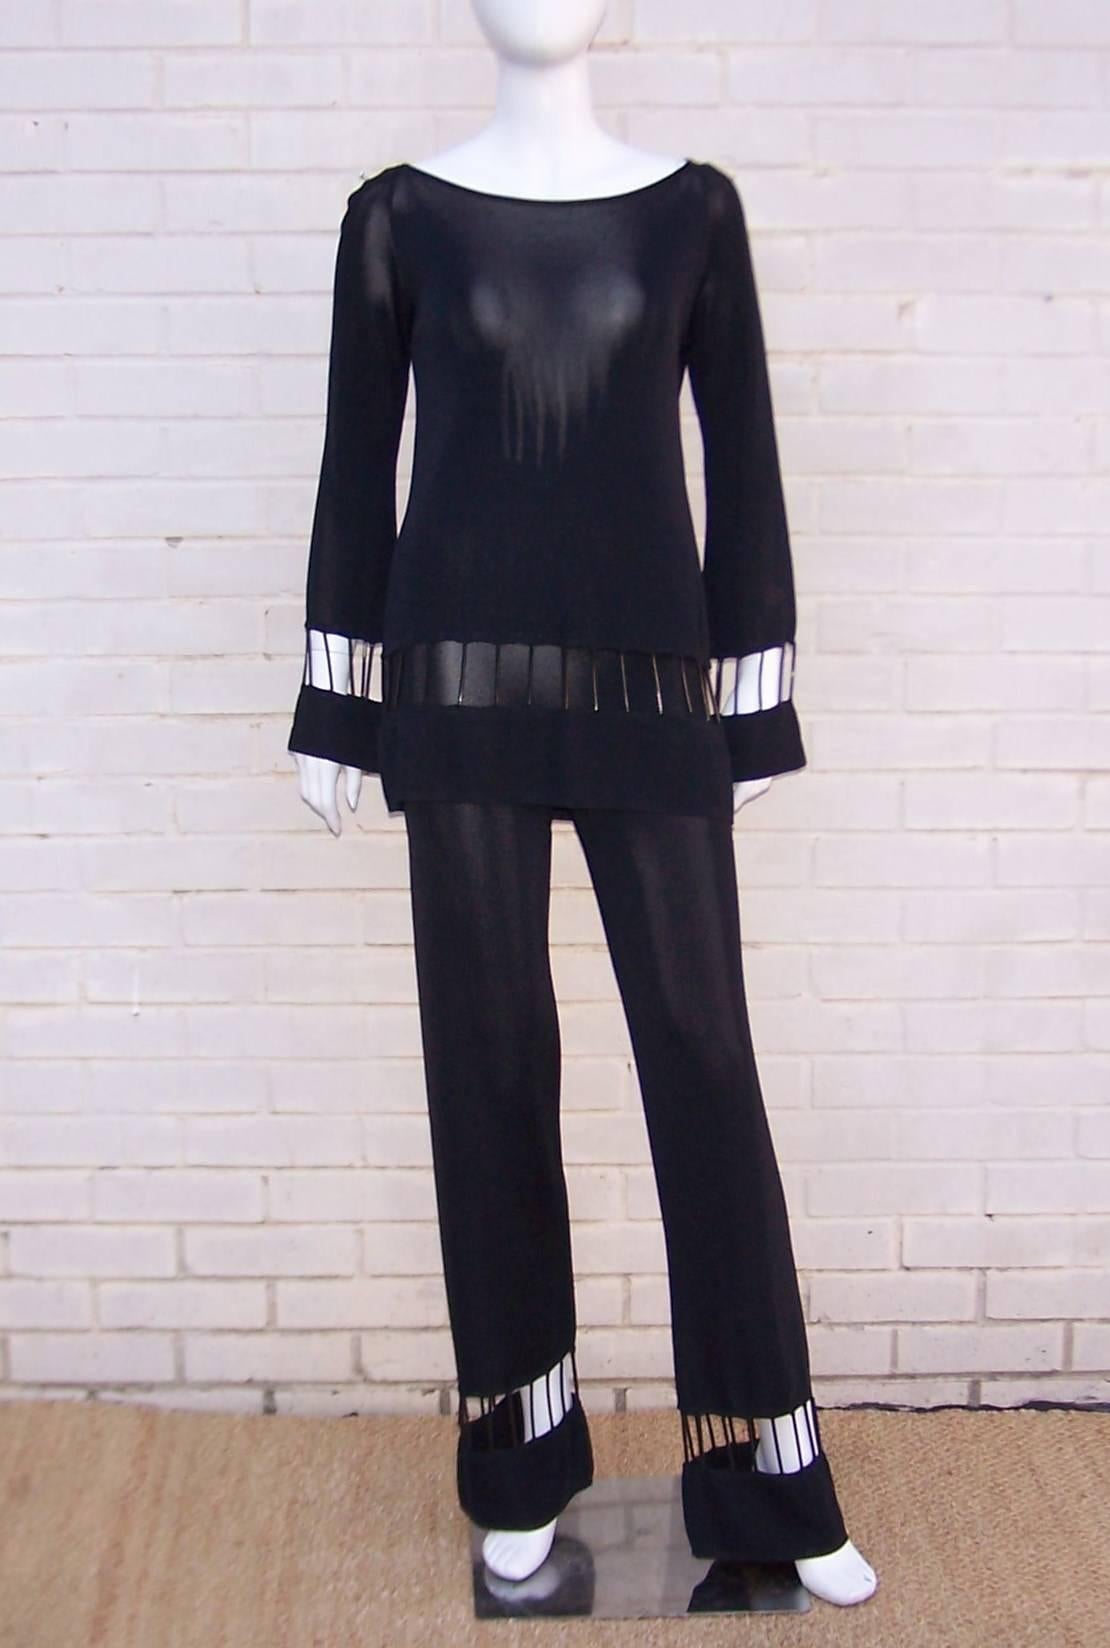 There are so many things to love about this Thierry Mugler two piece ensemble.  The unique design is modern and contemporary but with a nod to the mod designs of the 1960's.  The slinky black jersey fabric is embellished with 2.25